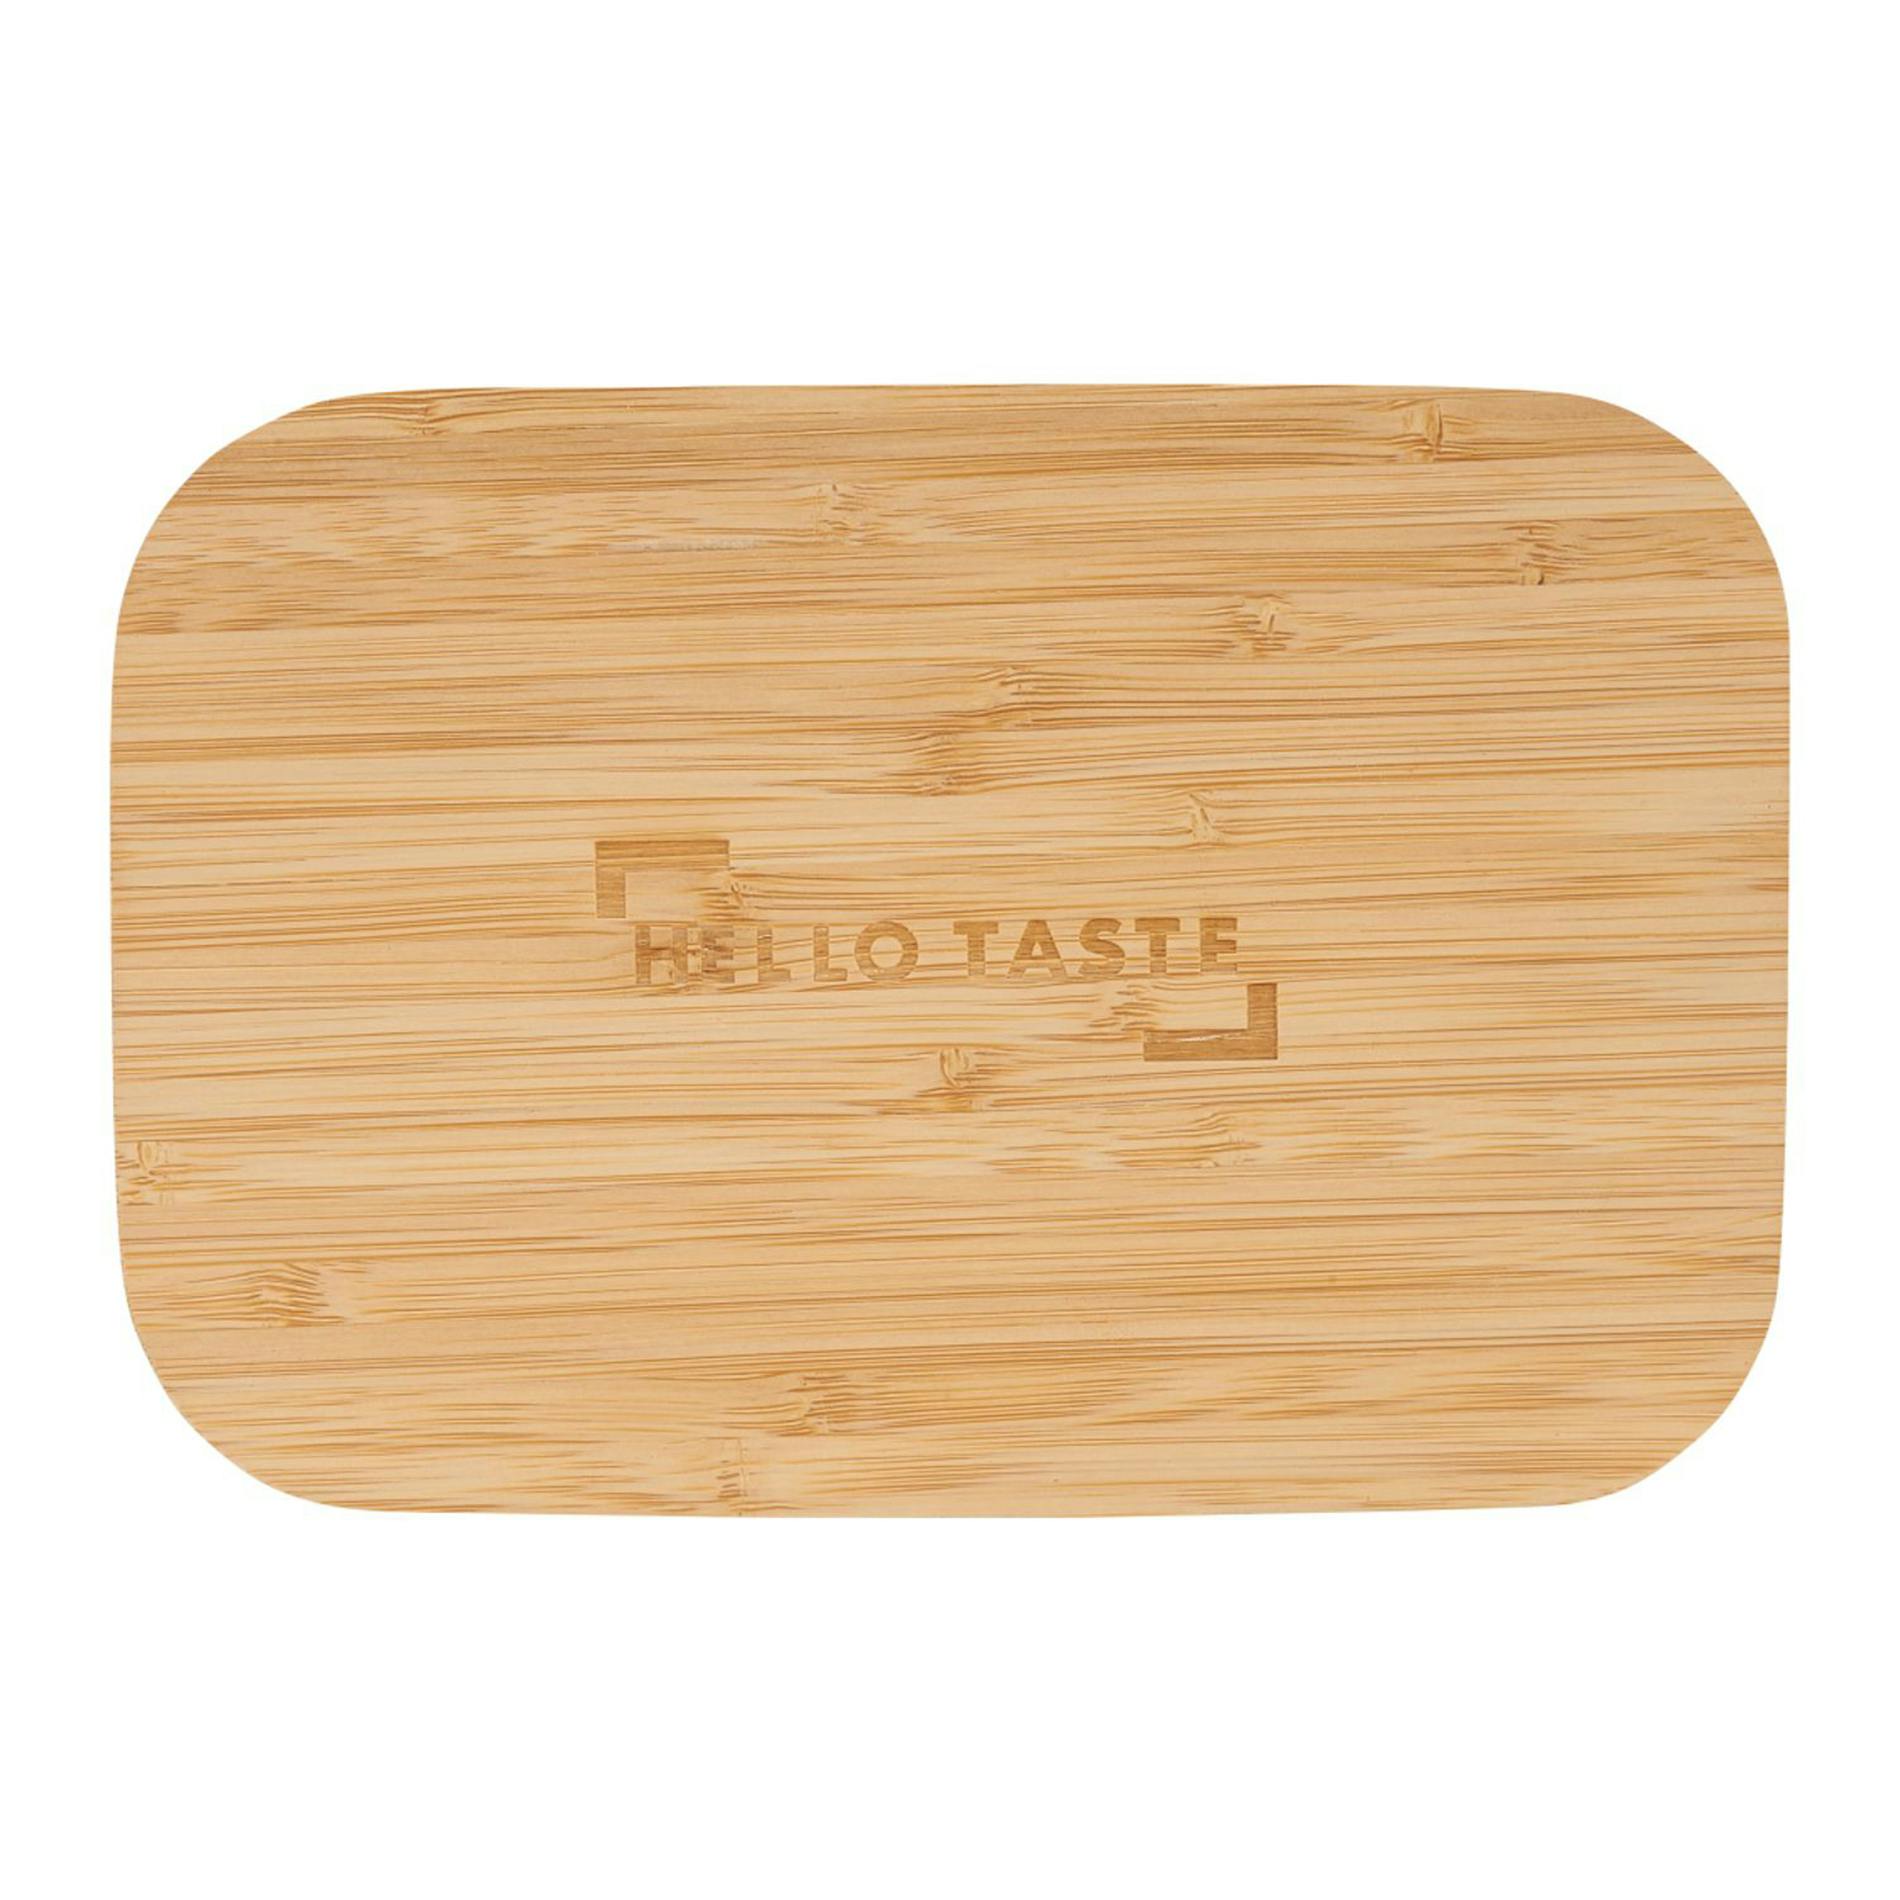 Bamboo Fiber Lunch Box with Cutting Board Lid - additional Image 2